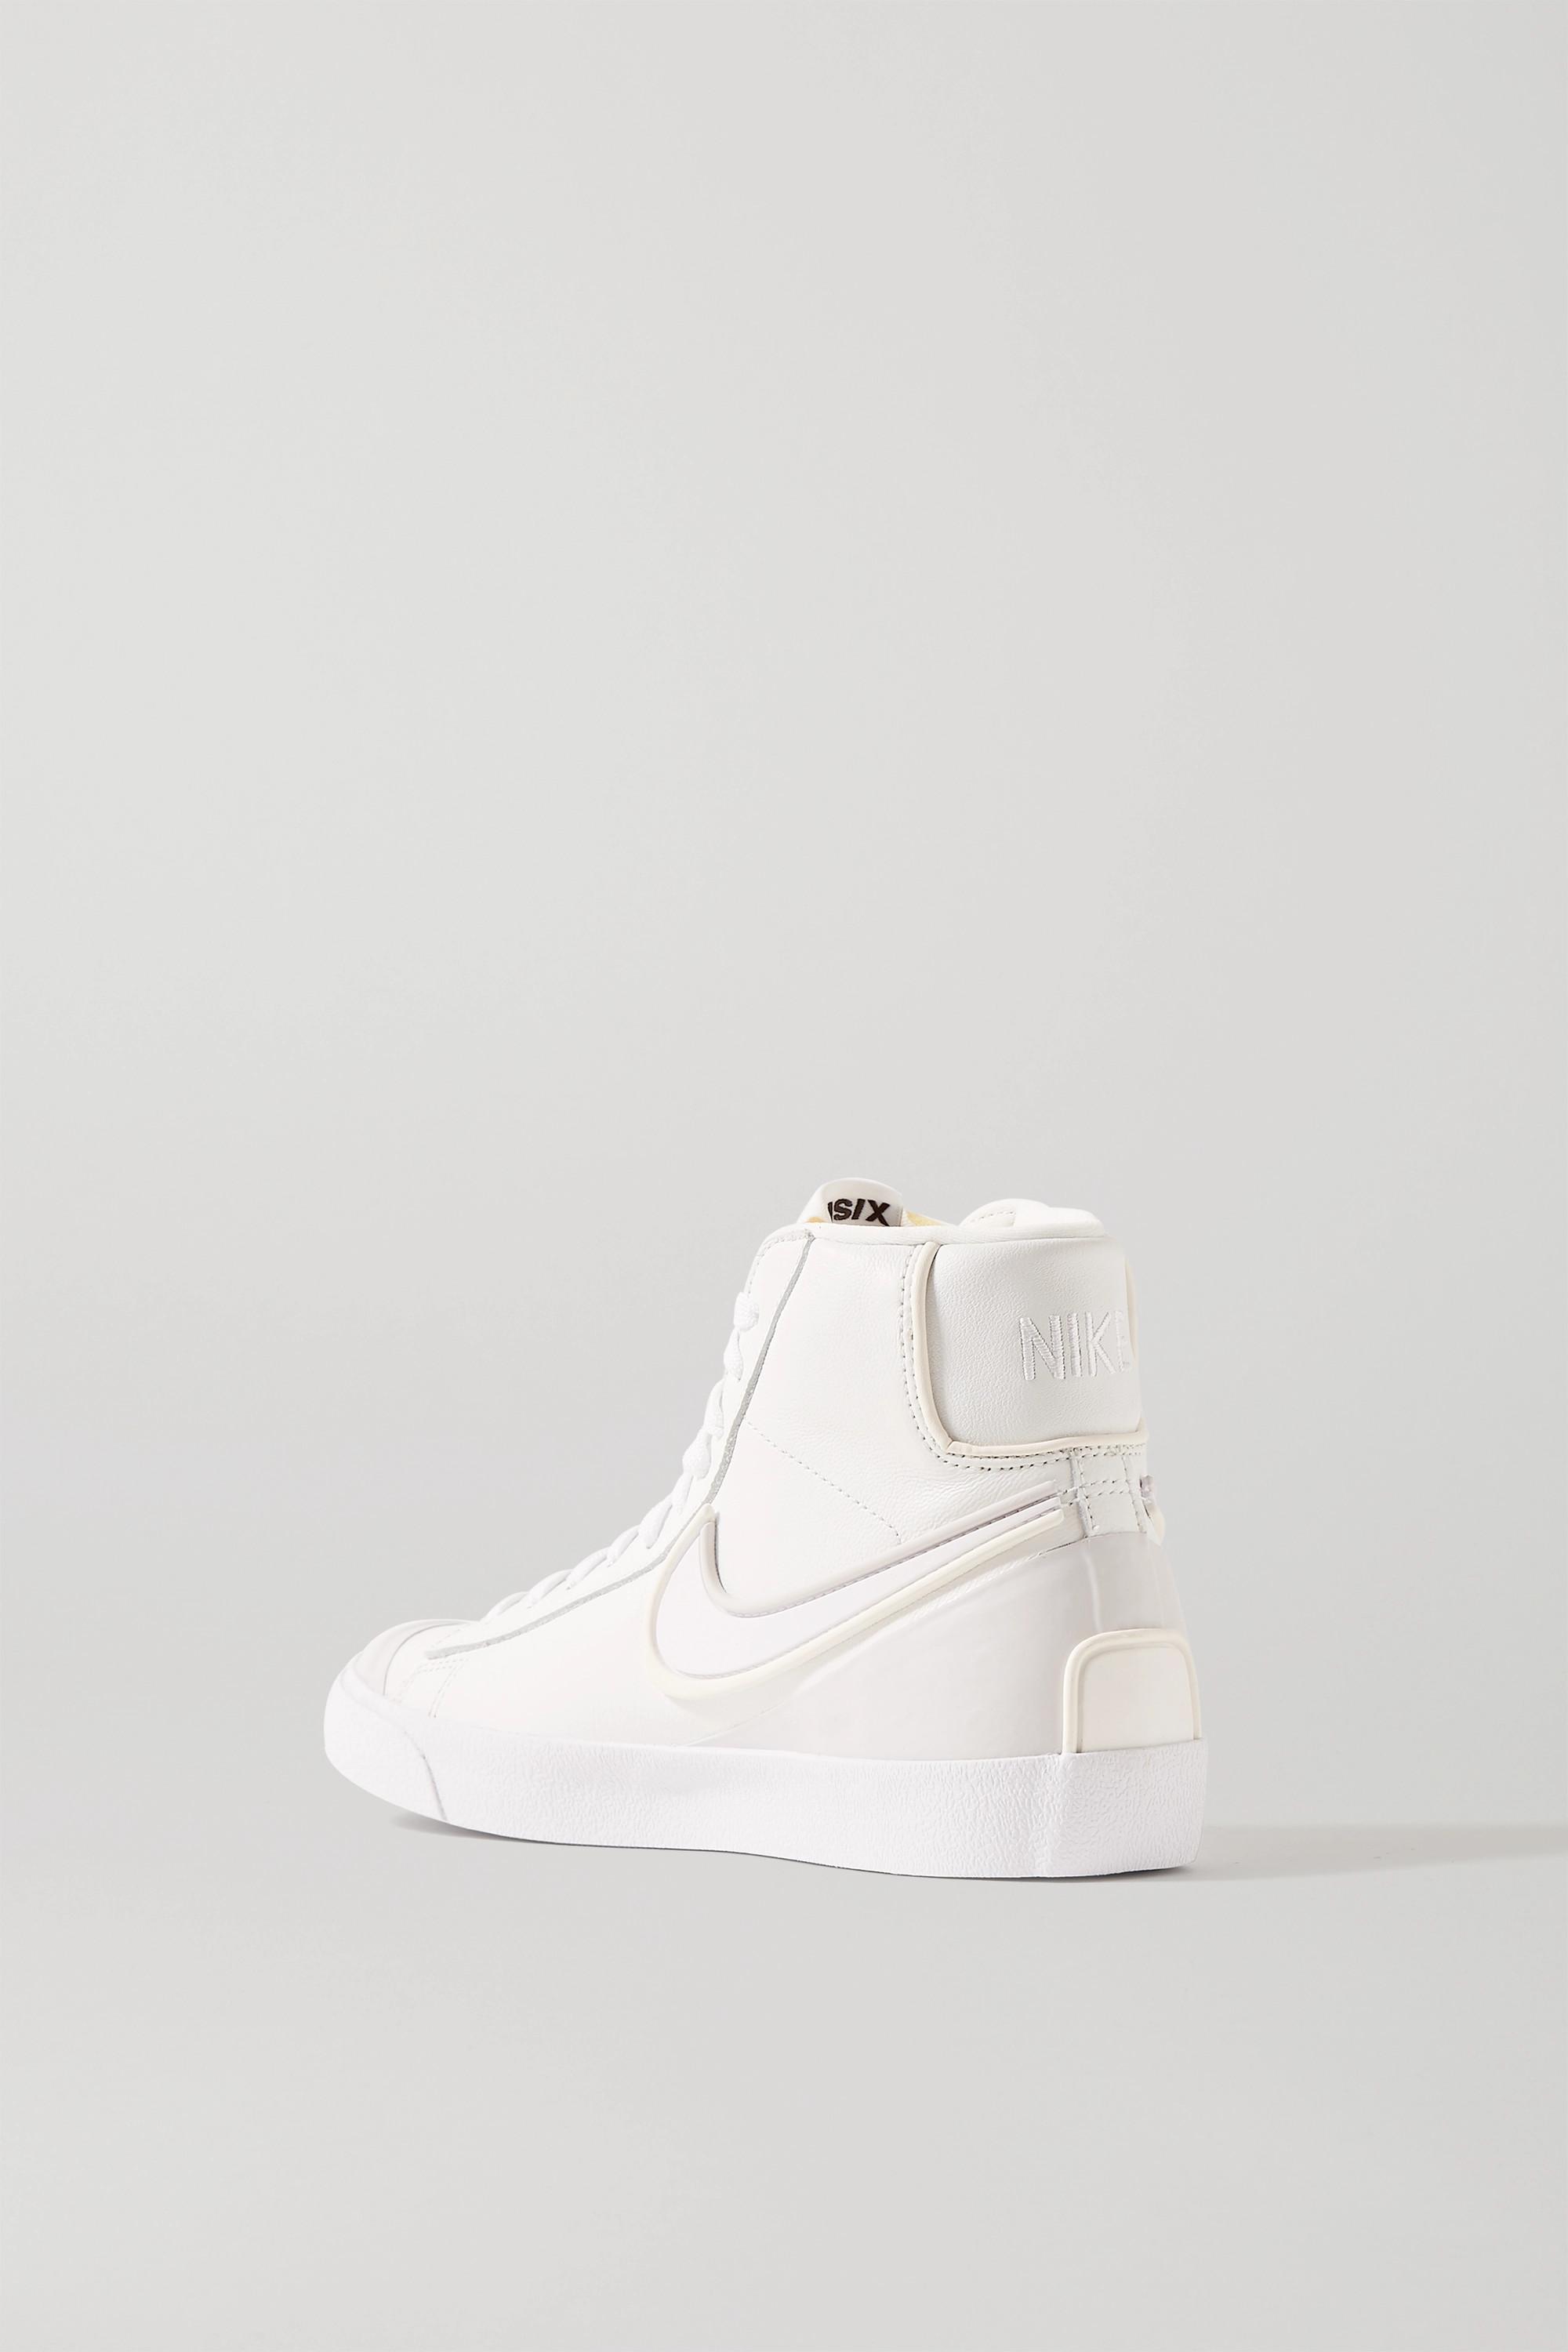 Nike Blazer Mid '77 Infinite Textured-leather High-top Sneakers in White |  Lyst